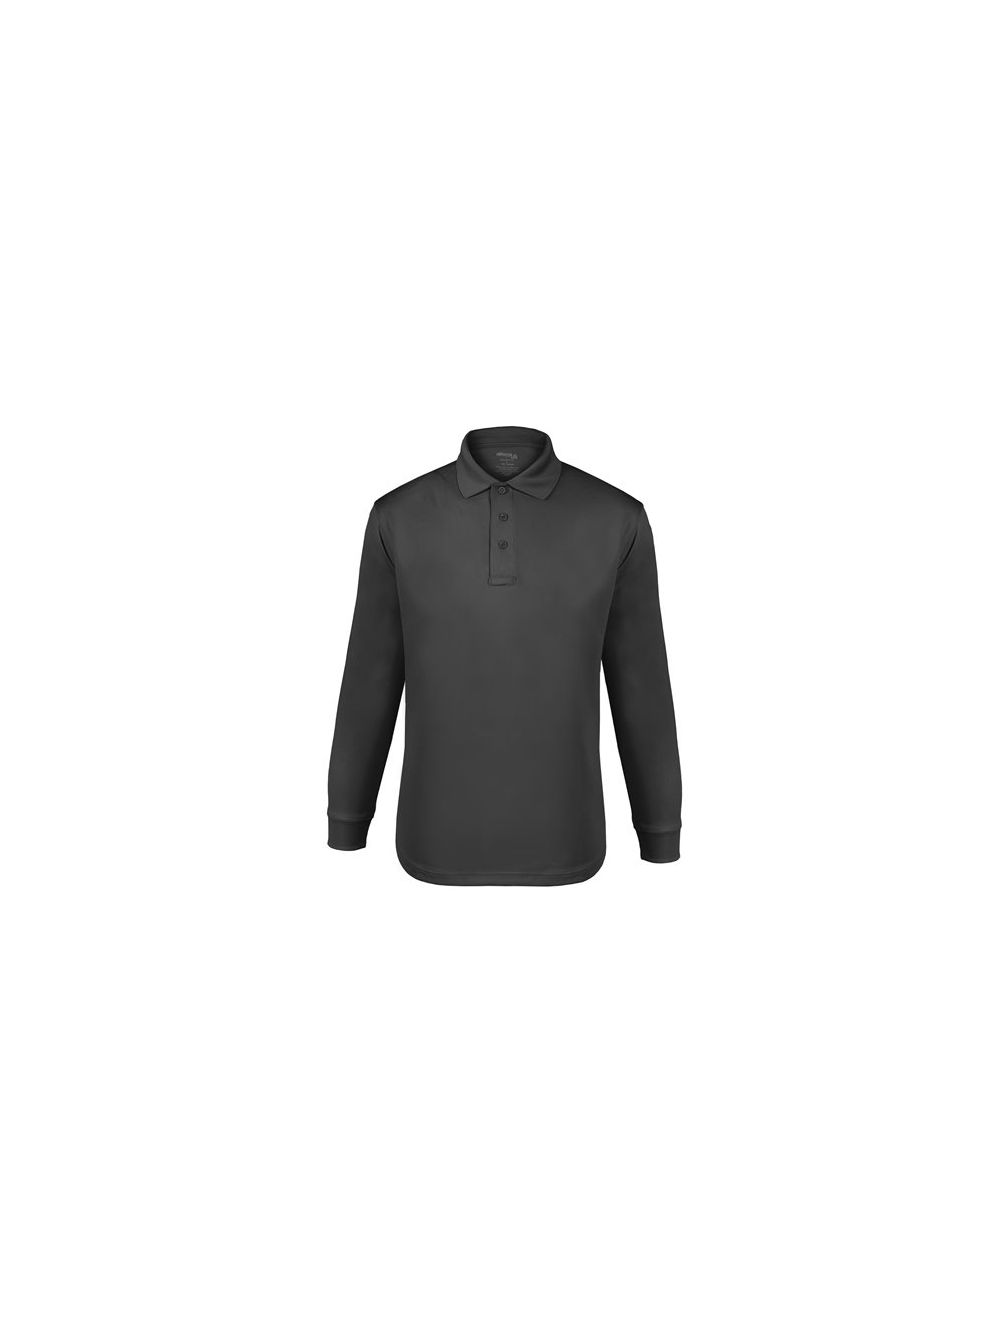 Ufx LS Tactical Polo